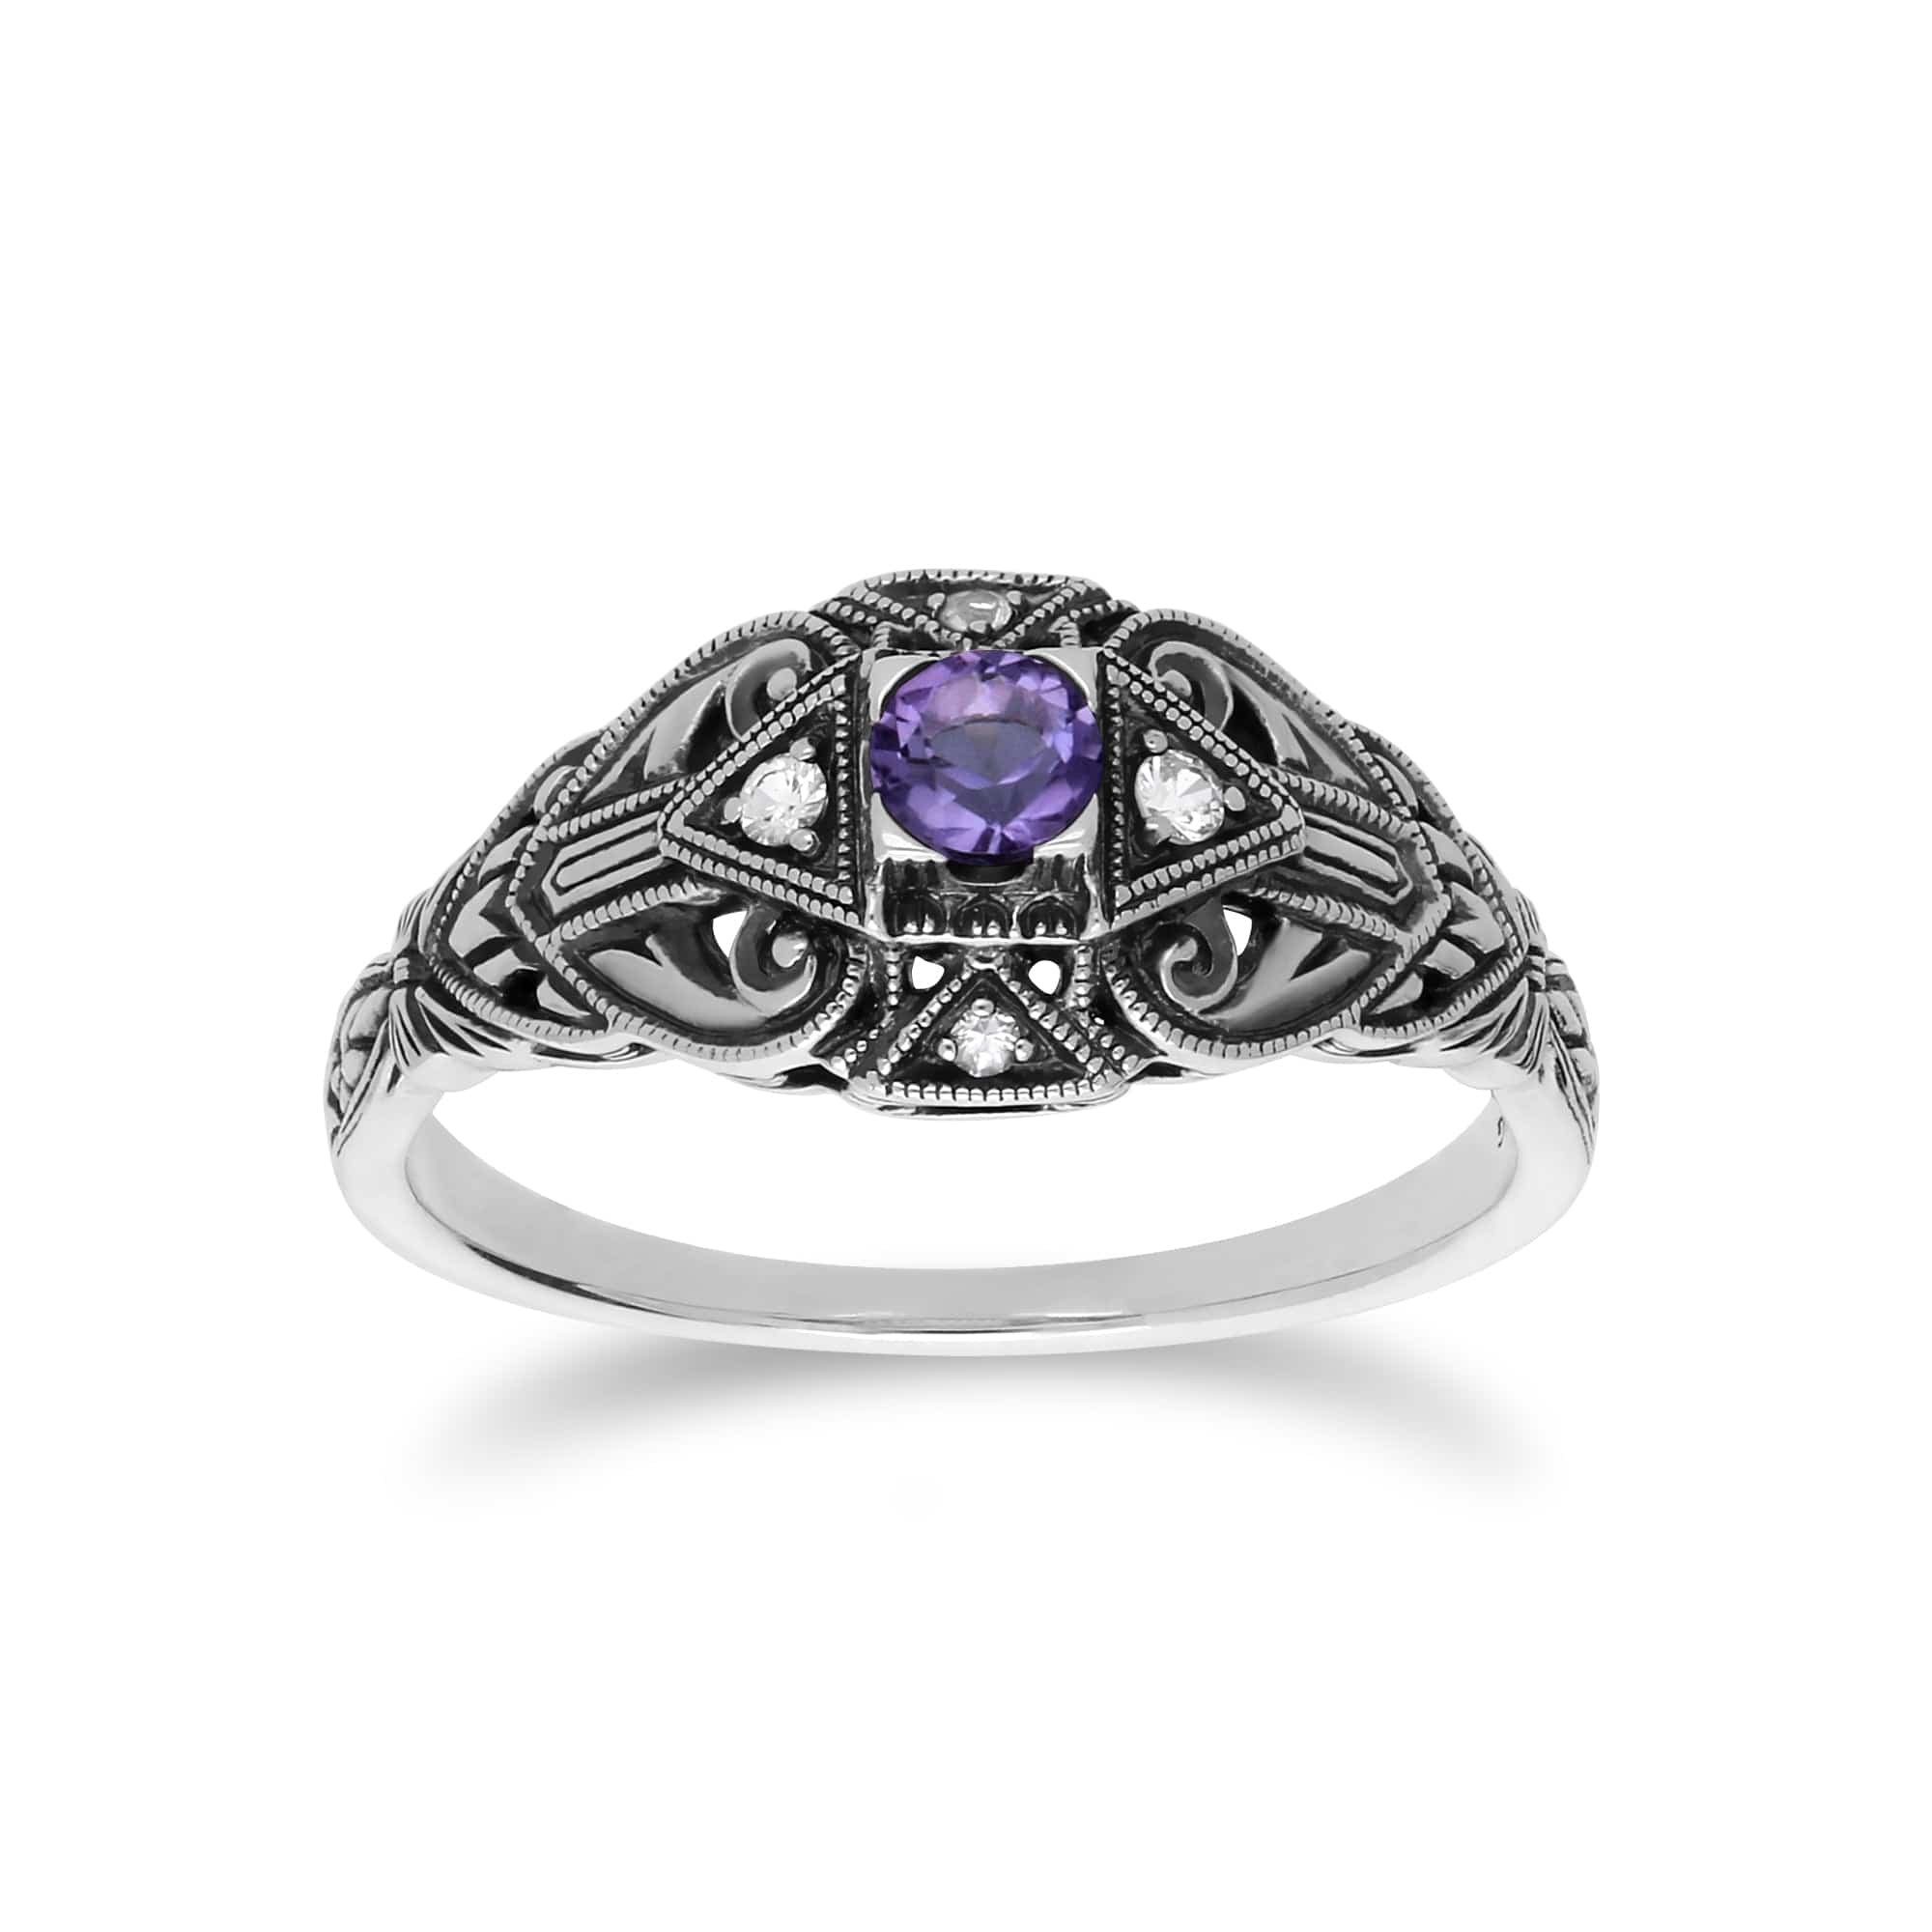 241R210302925 Art Deco Style Round Amethyst & White Topaz  Ring in 925 Sterling Silver 1